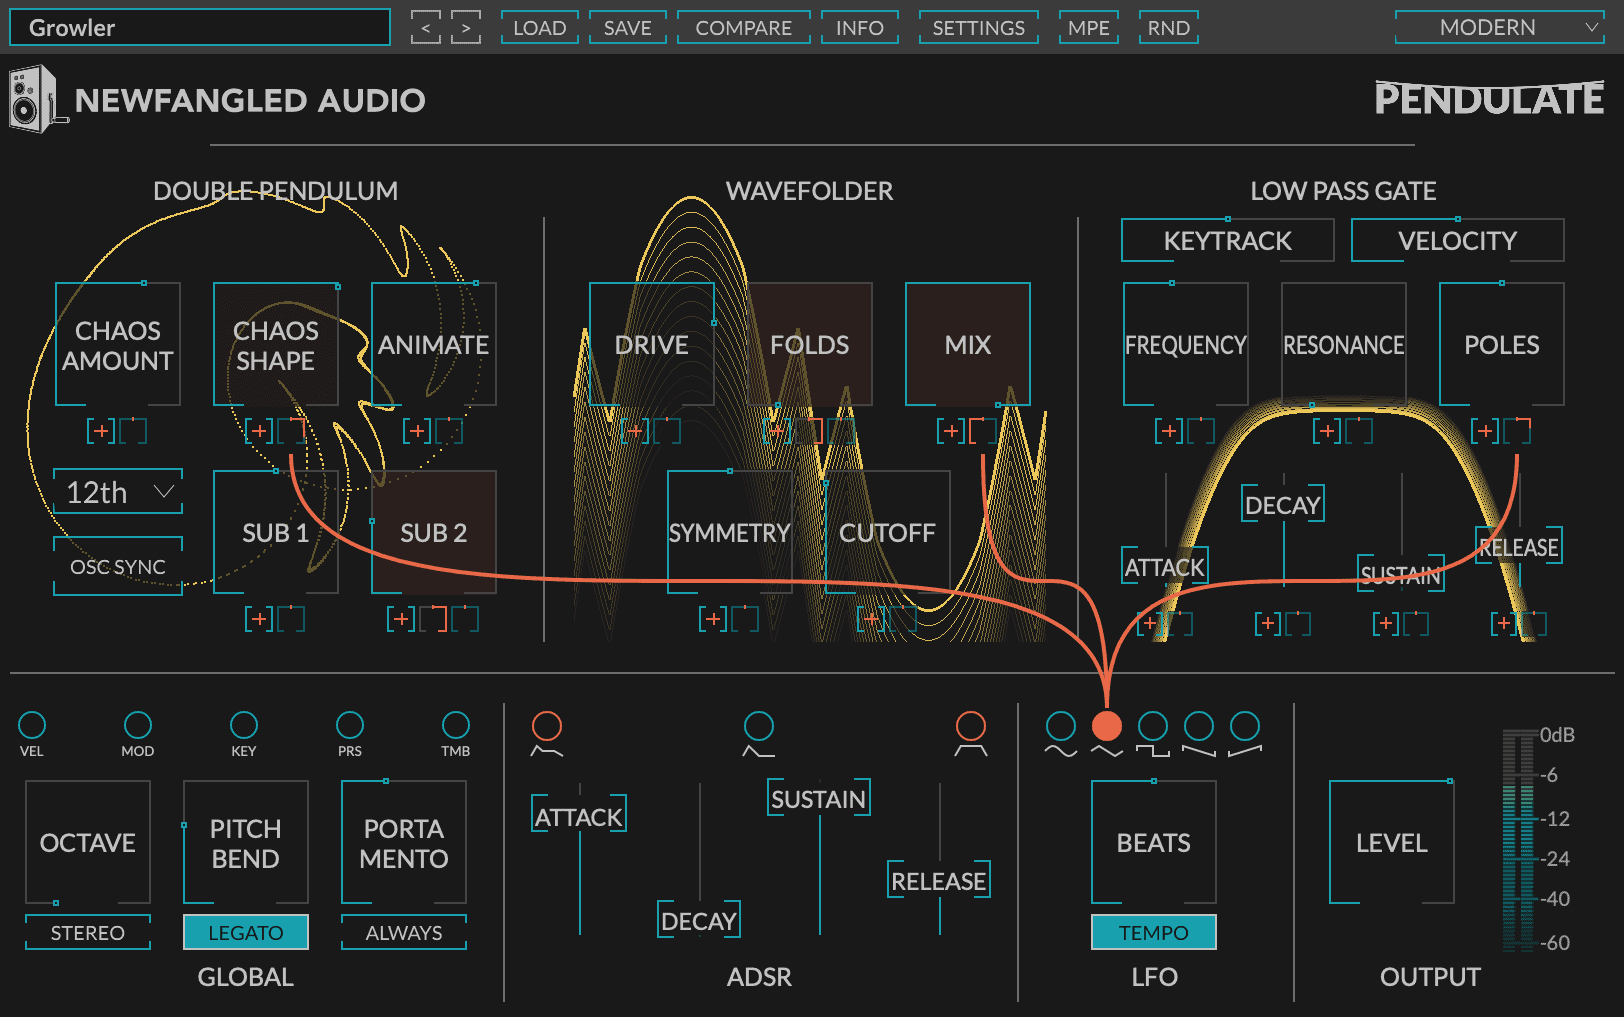 Pendulate – A Chaotic Monosynth by Newfangled Audio